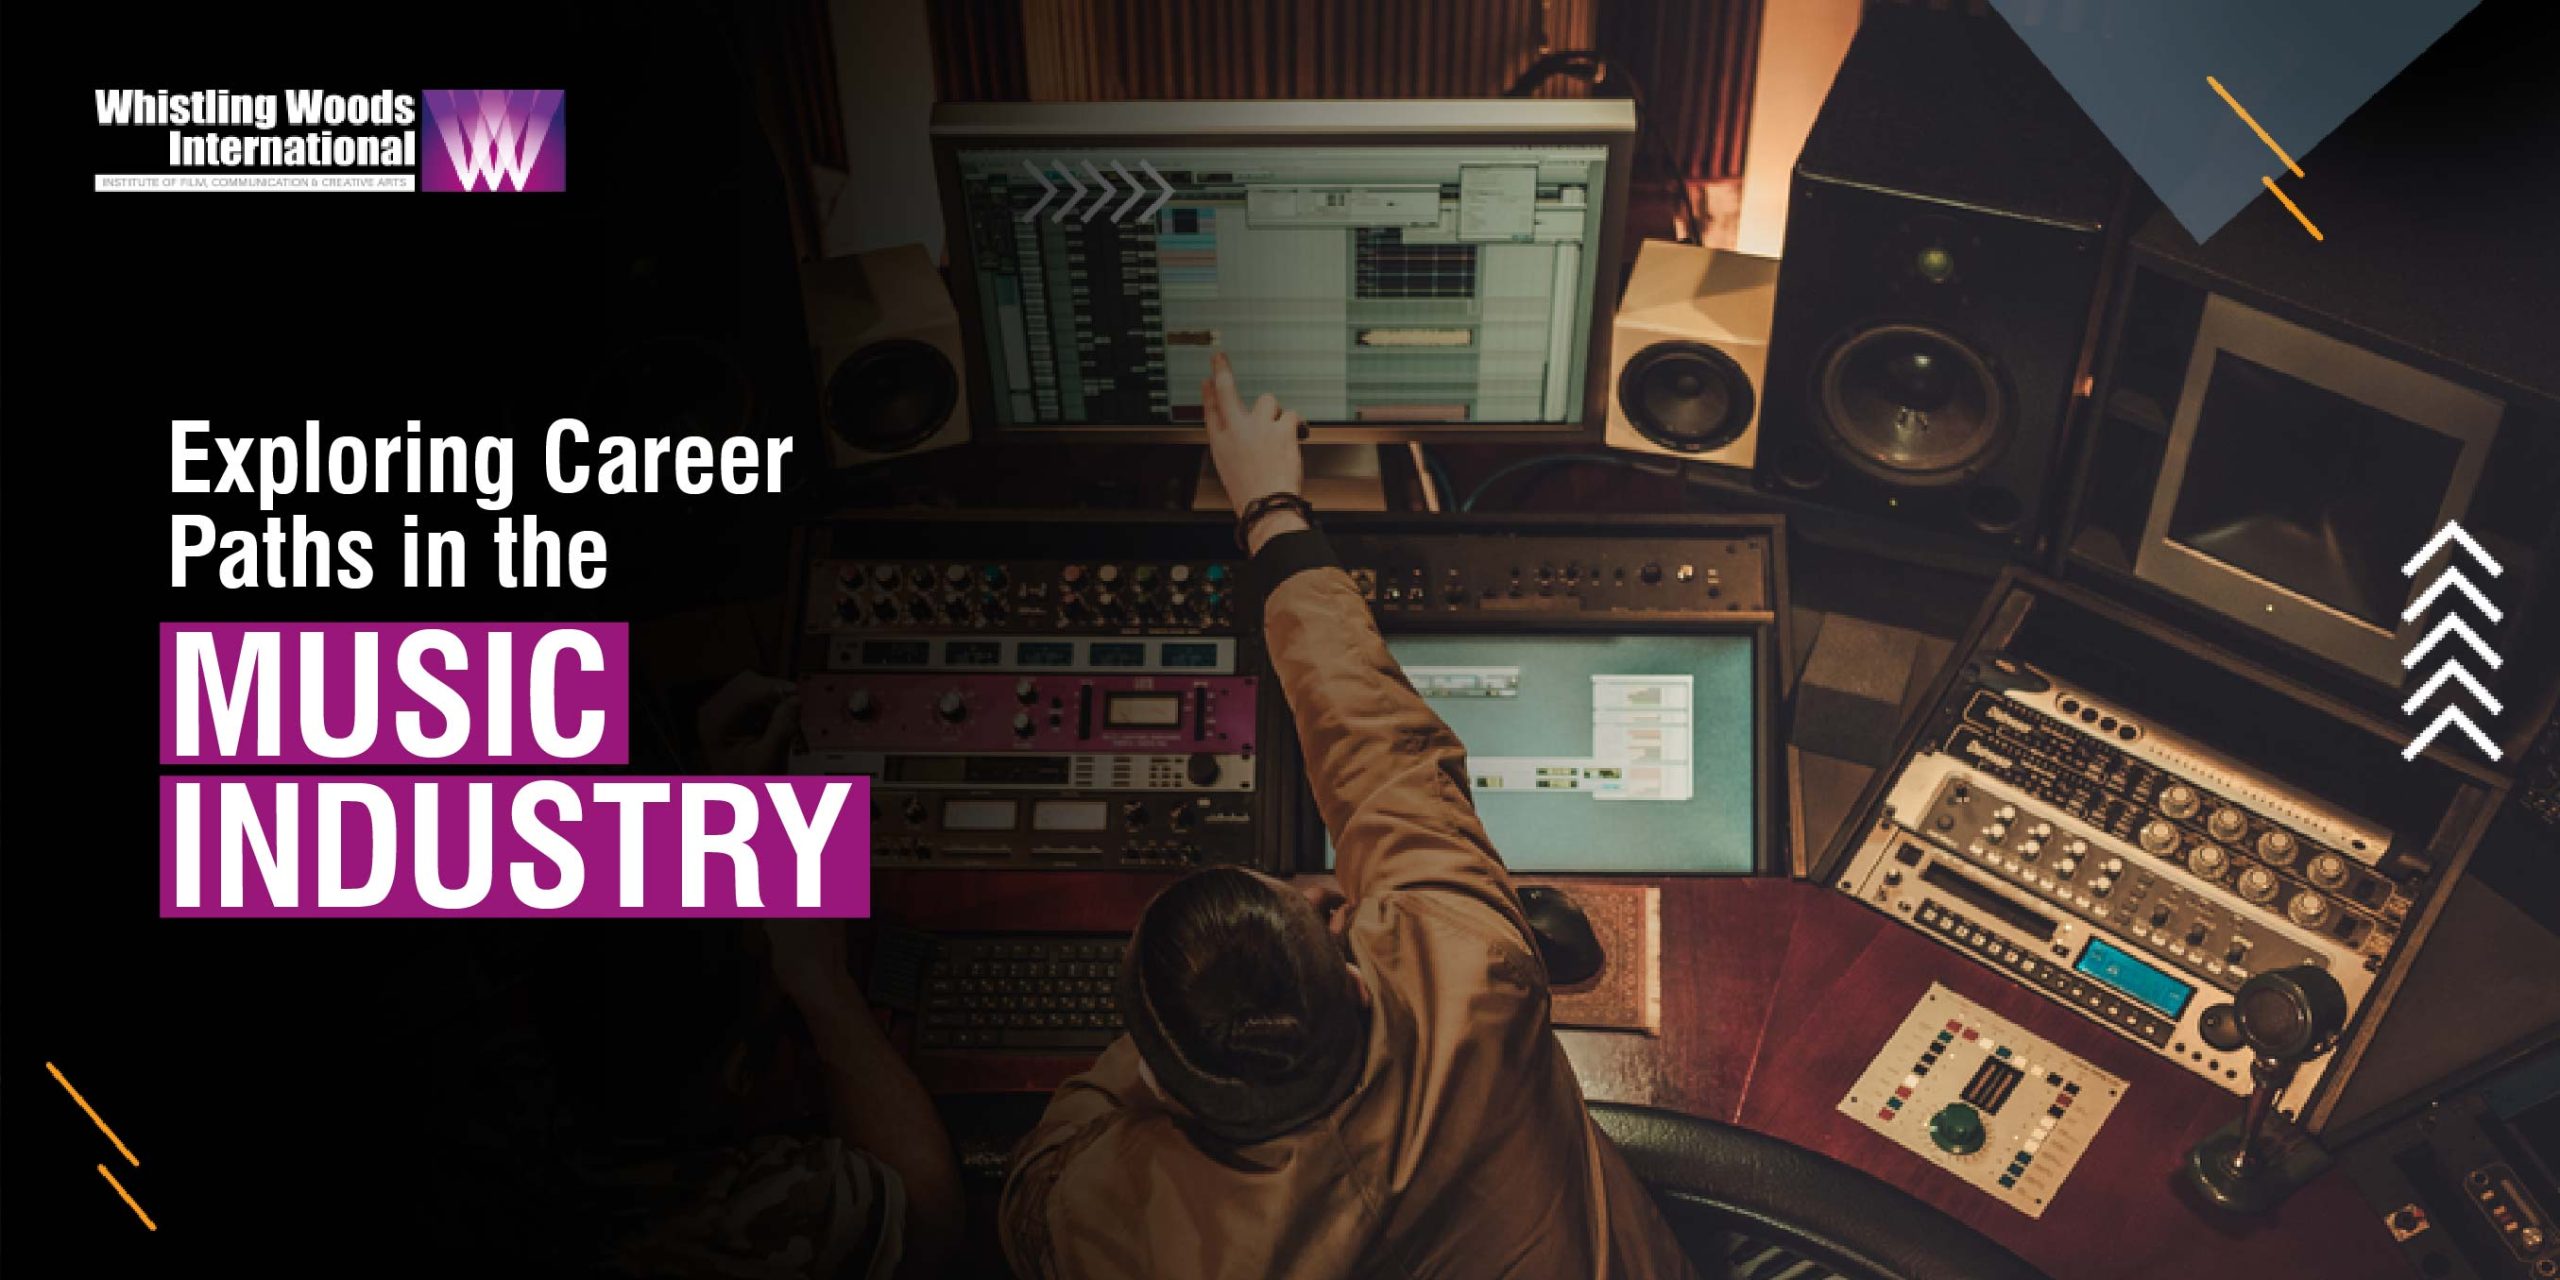 Carrers in Music and Recording Industry Career Field - IResearchNet